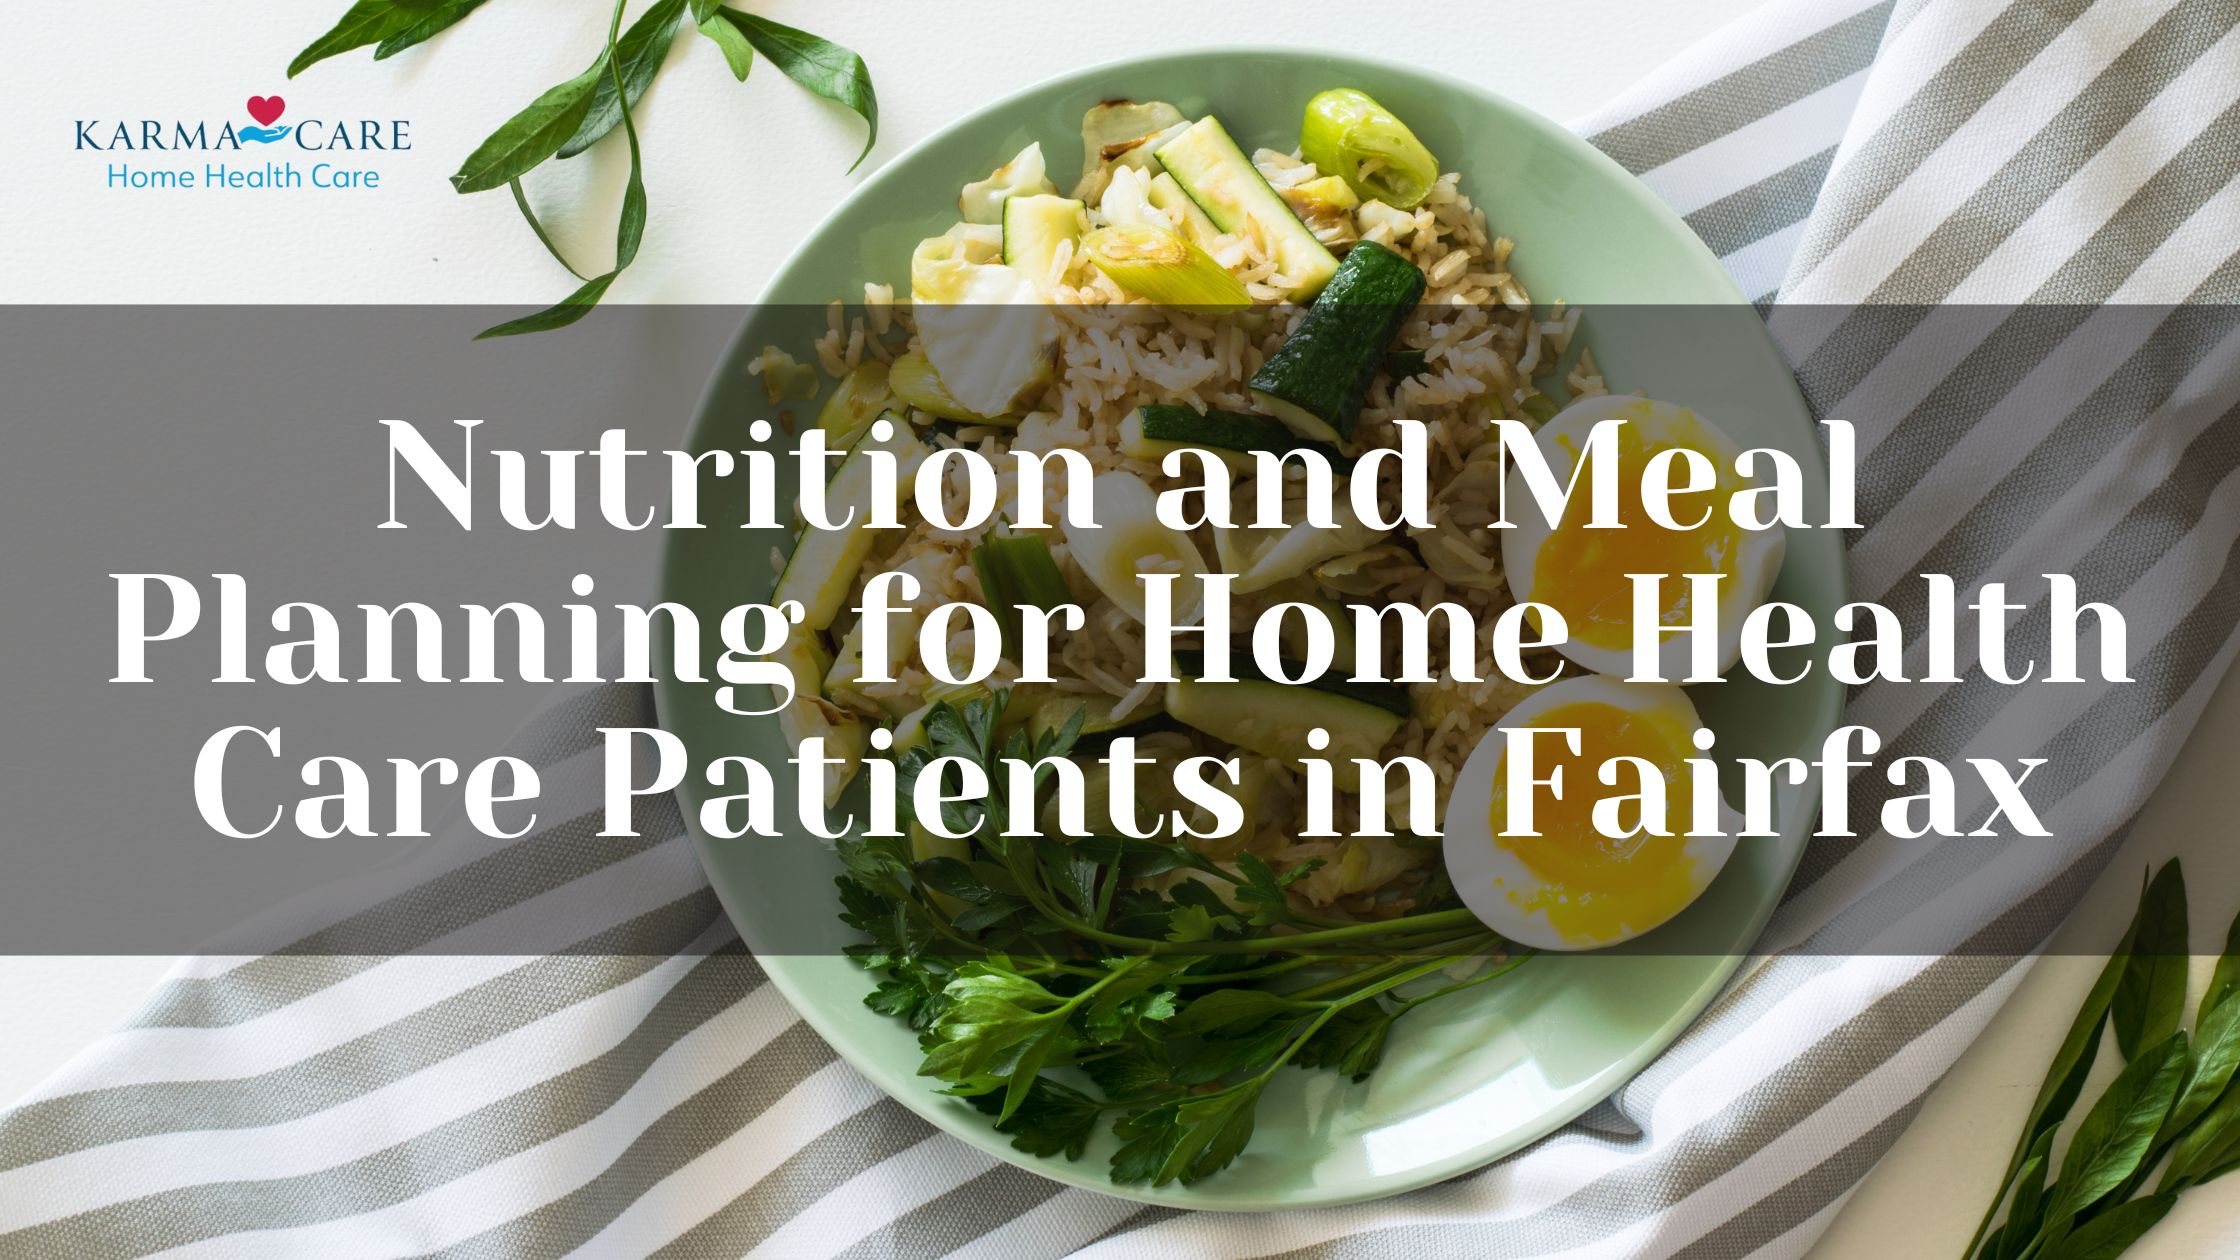 Nutrition and Meal Planning for Home Health Care Patients in Fairfax